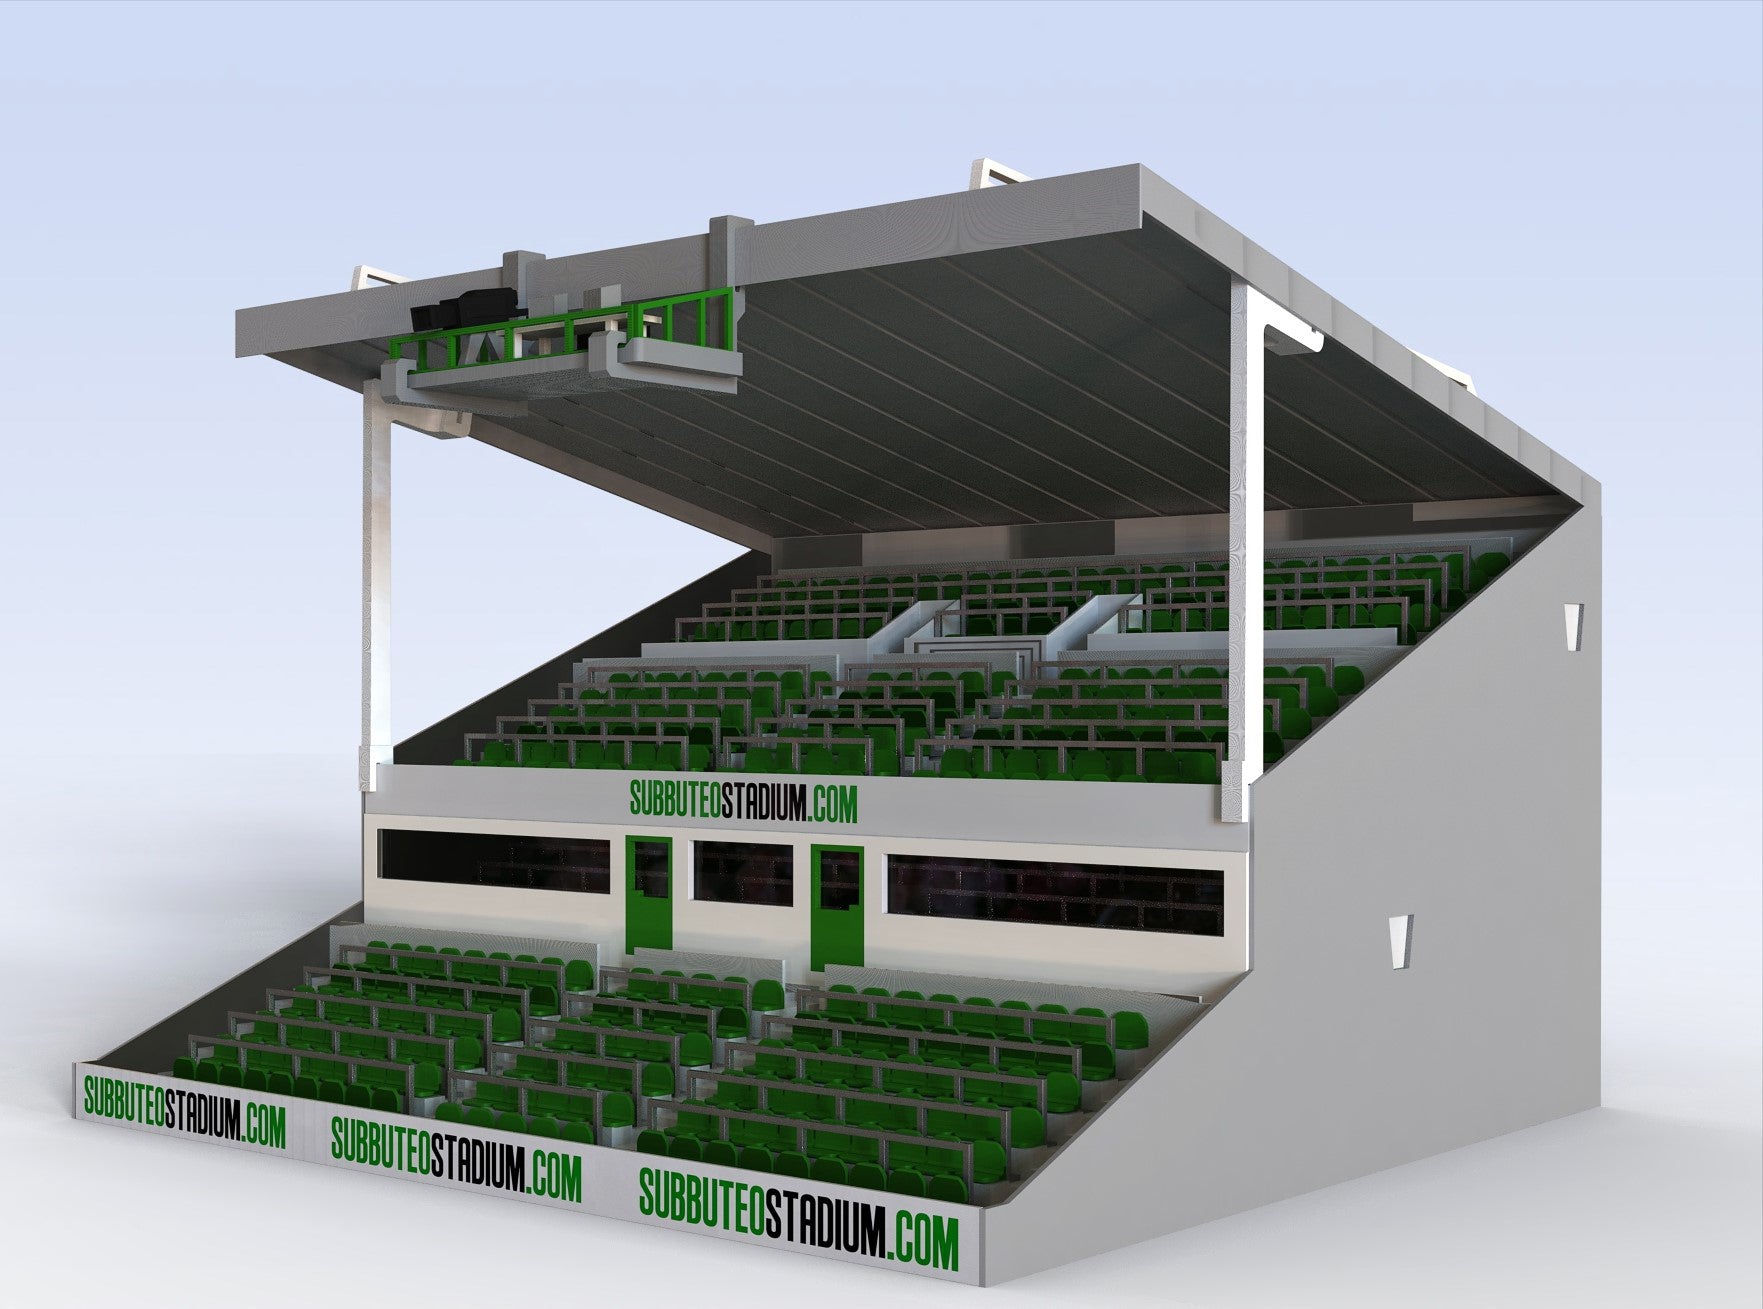 Safe standing package for Subbuteo 61216 and 61217 stands